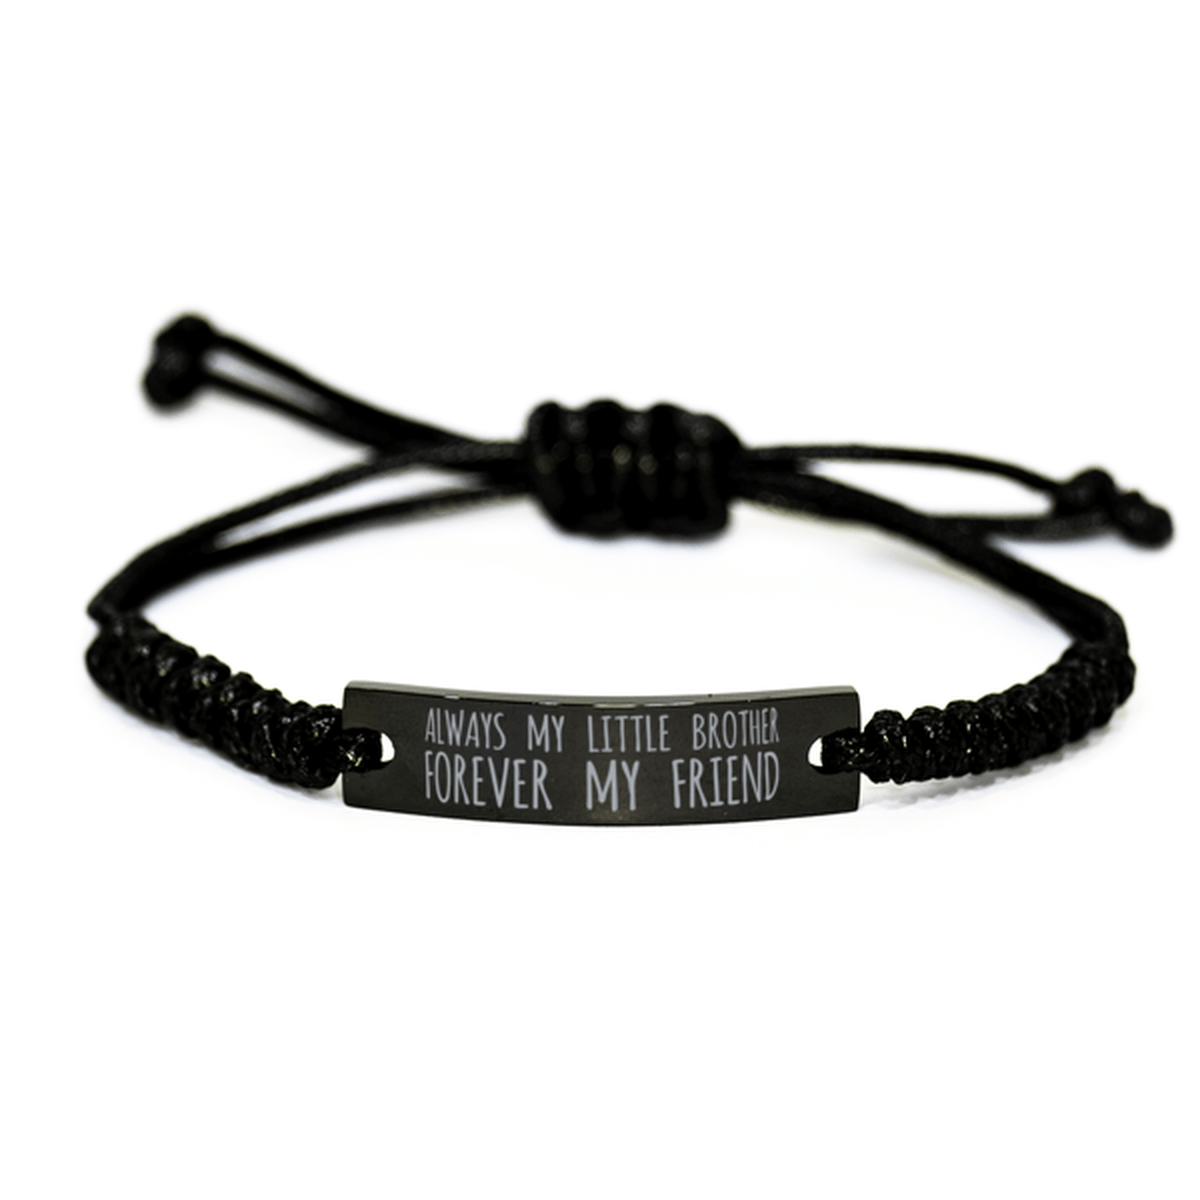 Inspirational Little Brother Black Rope Bracelet, Always My Little Brother Forever My Friend, Best Birthday Gifts For Family